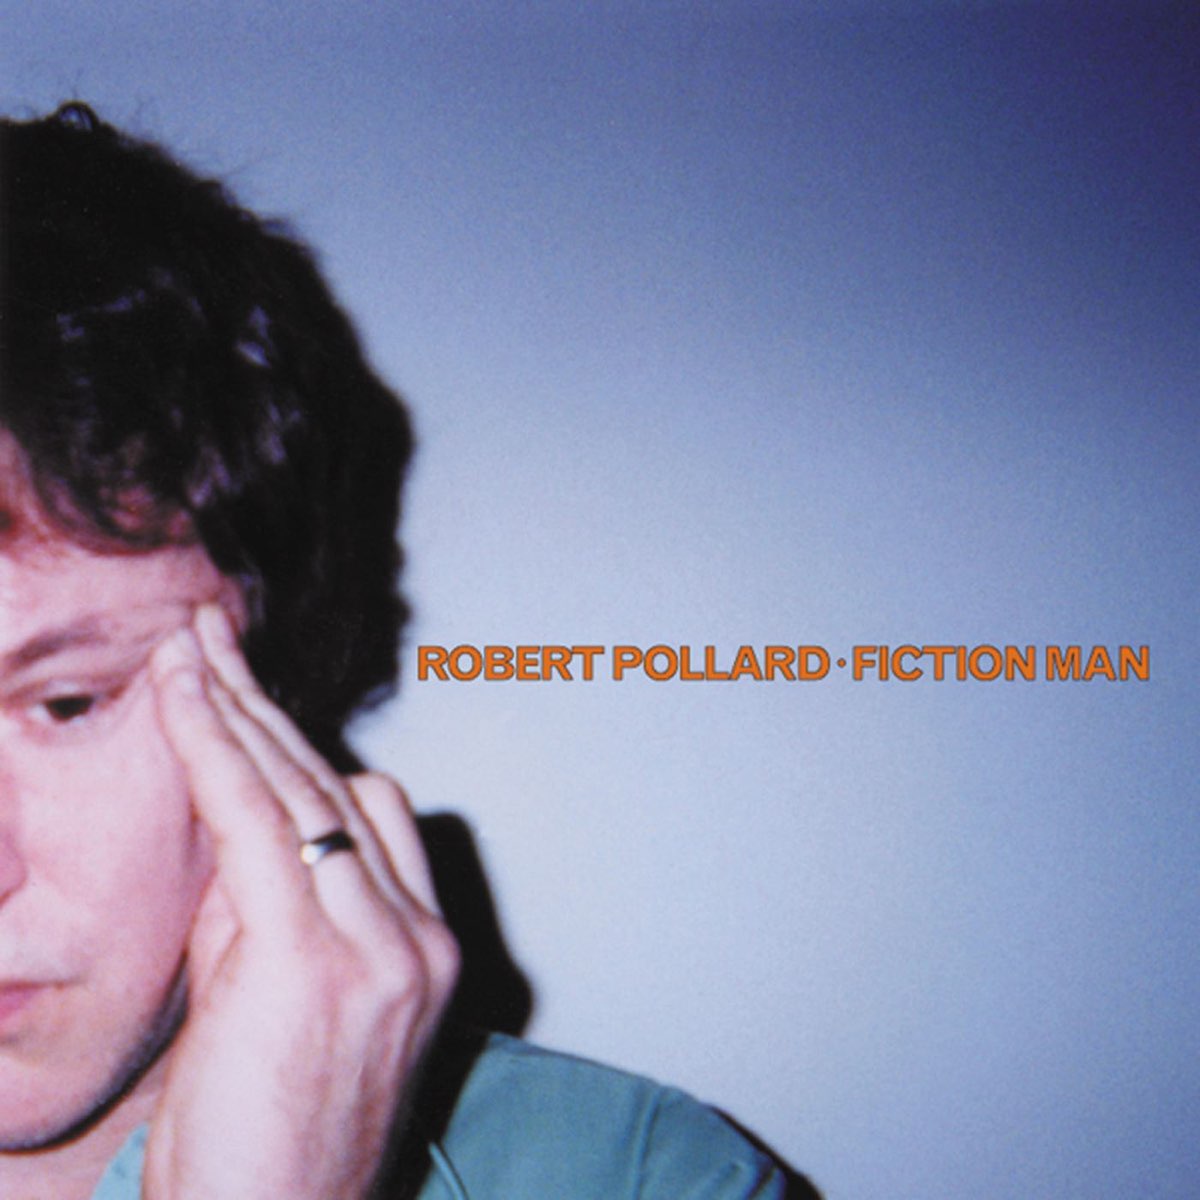 20 years ago today, #RobertPollard released “Fiction Man.” Life is one endless boogie, you know? See how many “Fiction Man” tracks make our list of the 500 best @_GuidedByVoices-related songs of all time: magnetmagazine.com/2023/12/28/the…